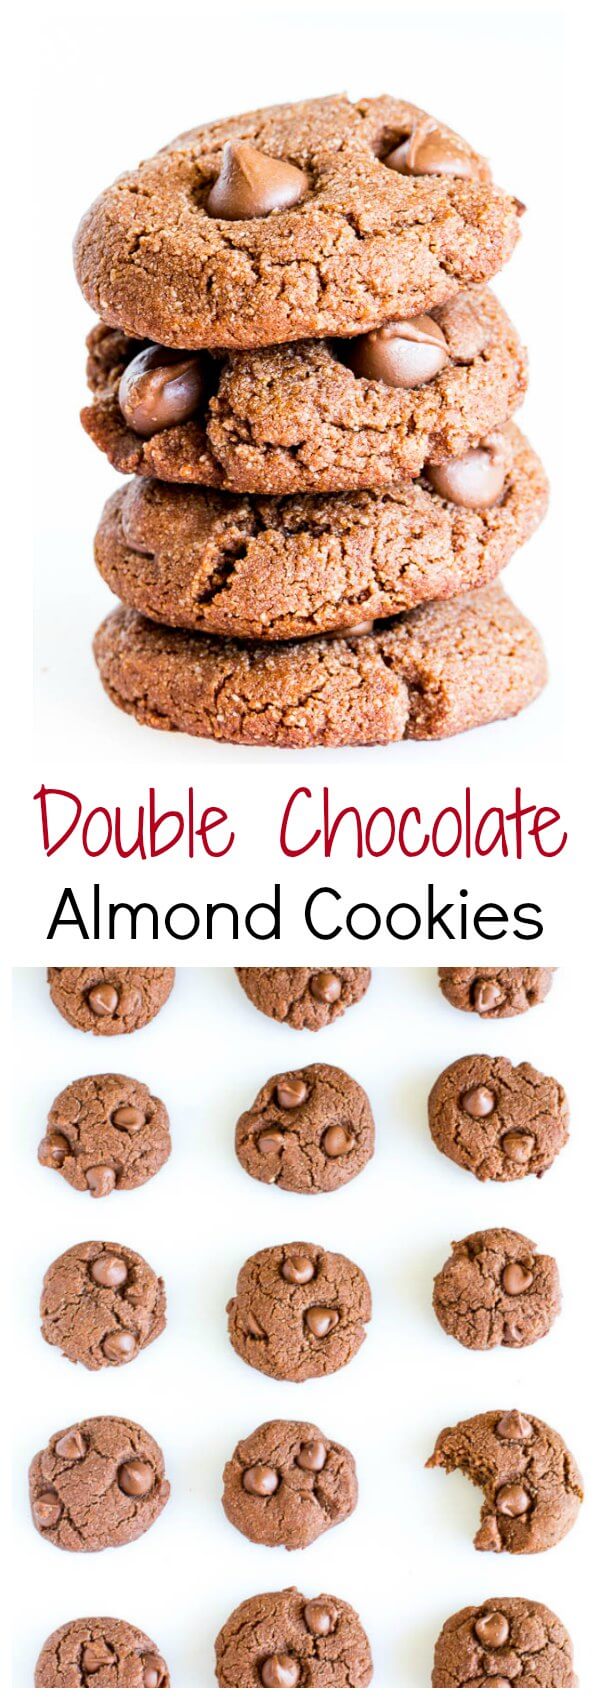 Double chocolate almond cookies for breakfast? Yes, you can! Super quick and easy, these gluten-free, processed sugar-free, dairy-free, eggless cookies are irresistibly chewy and delicious!!